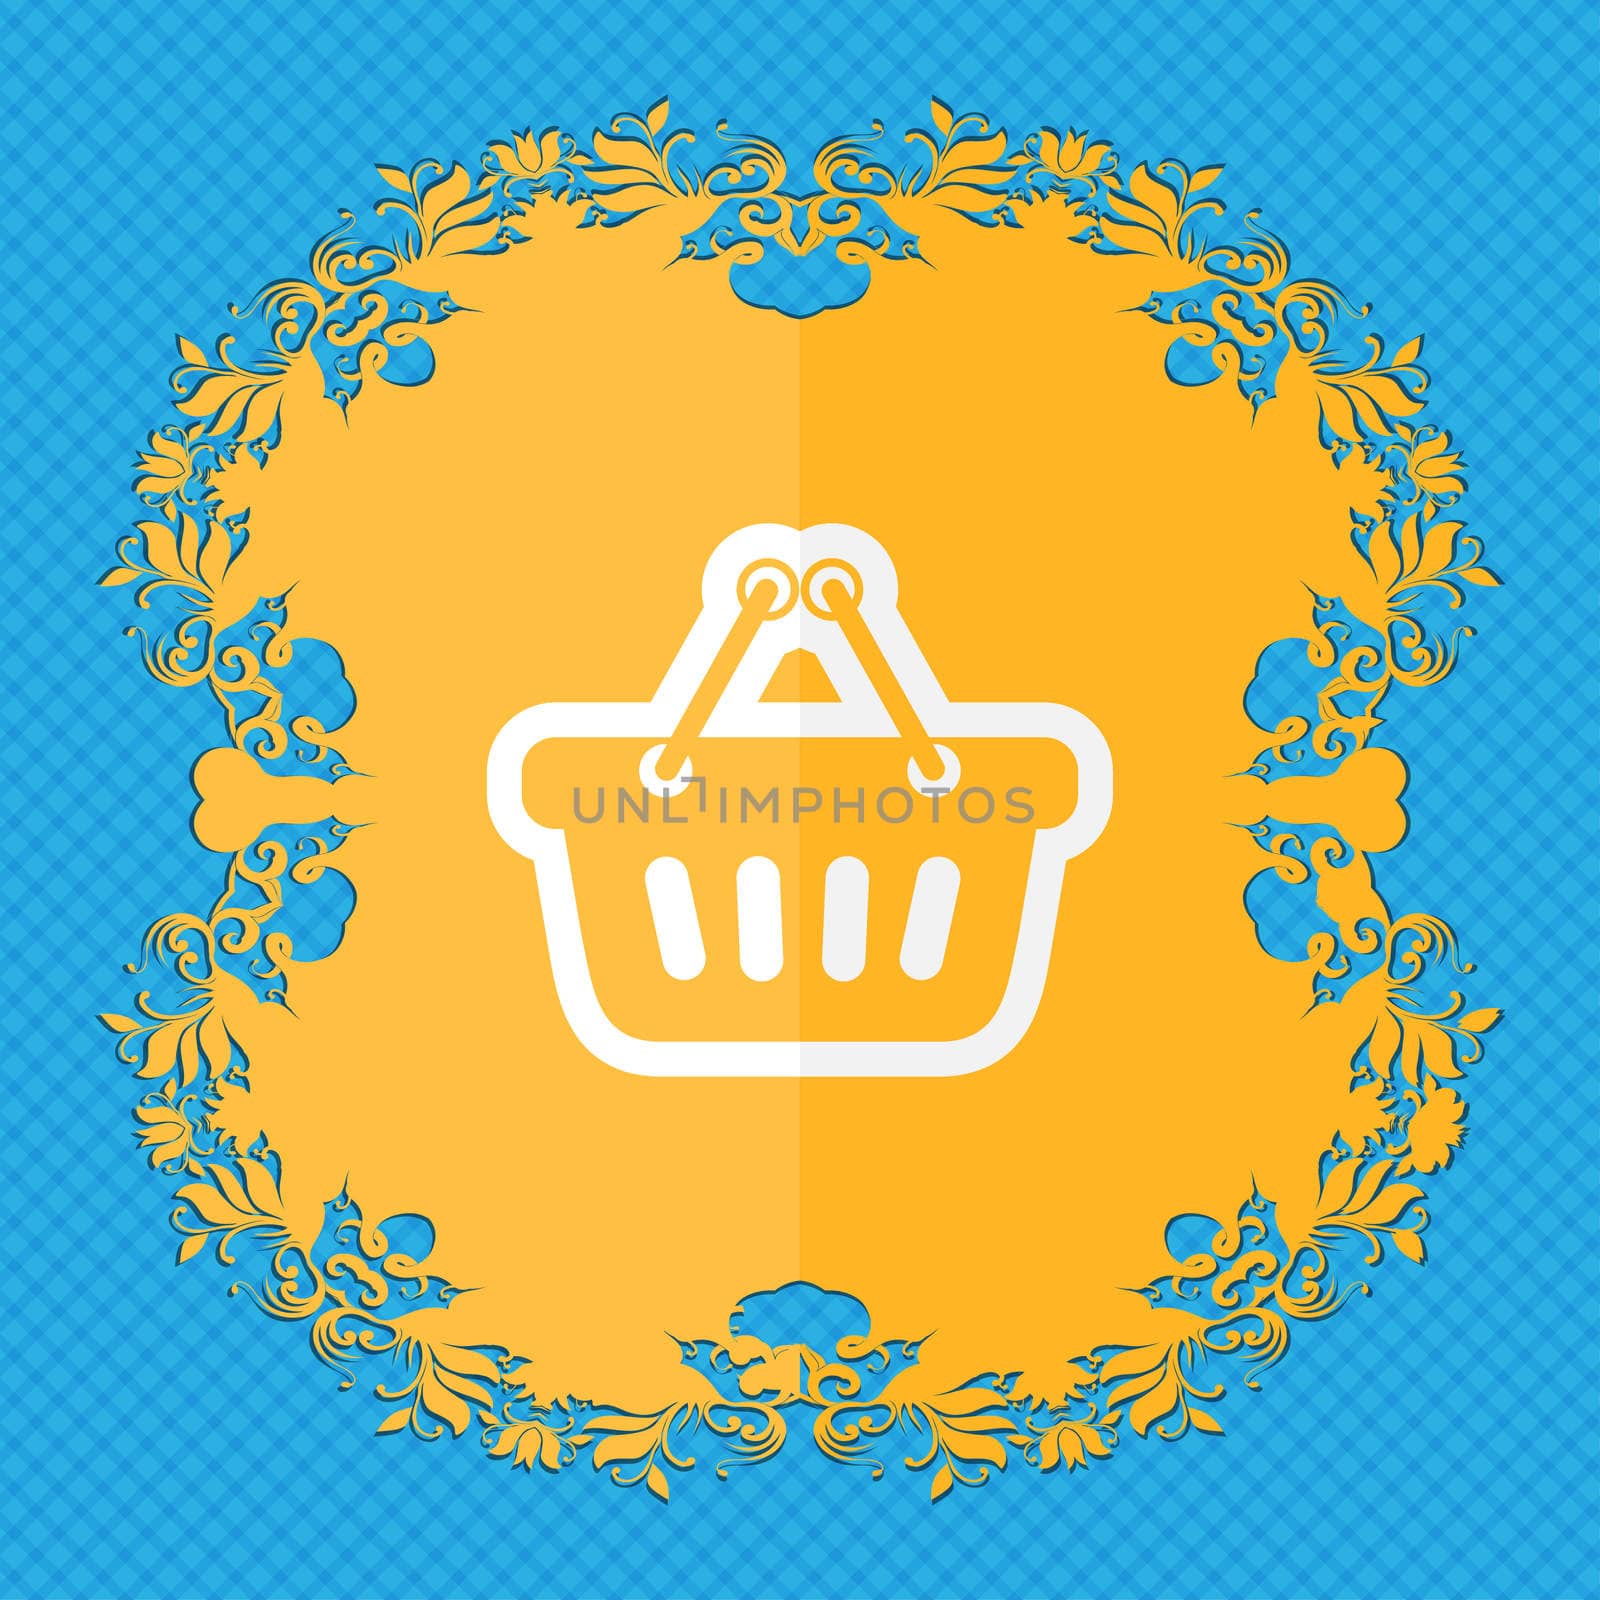 shopping cart. Floral flat design on a blue abstract background with place for your text. illustration